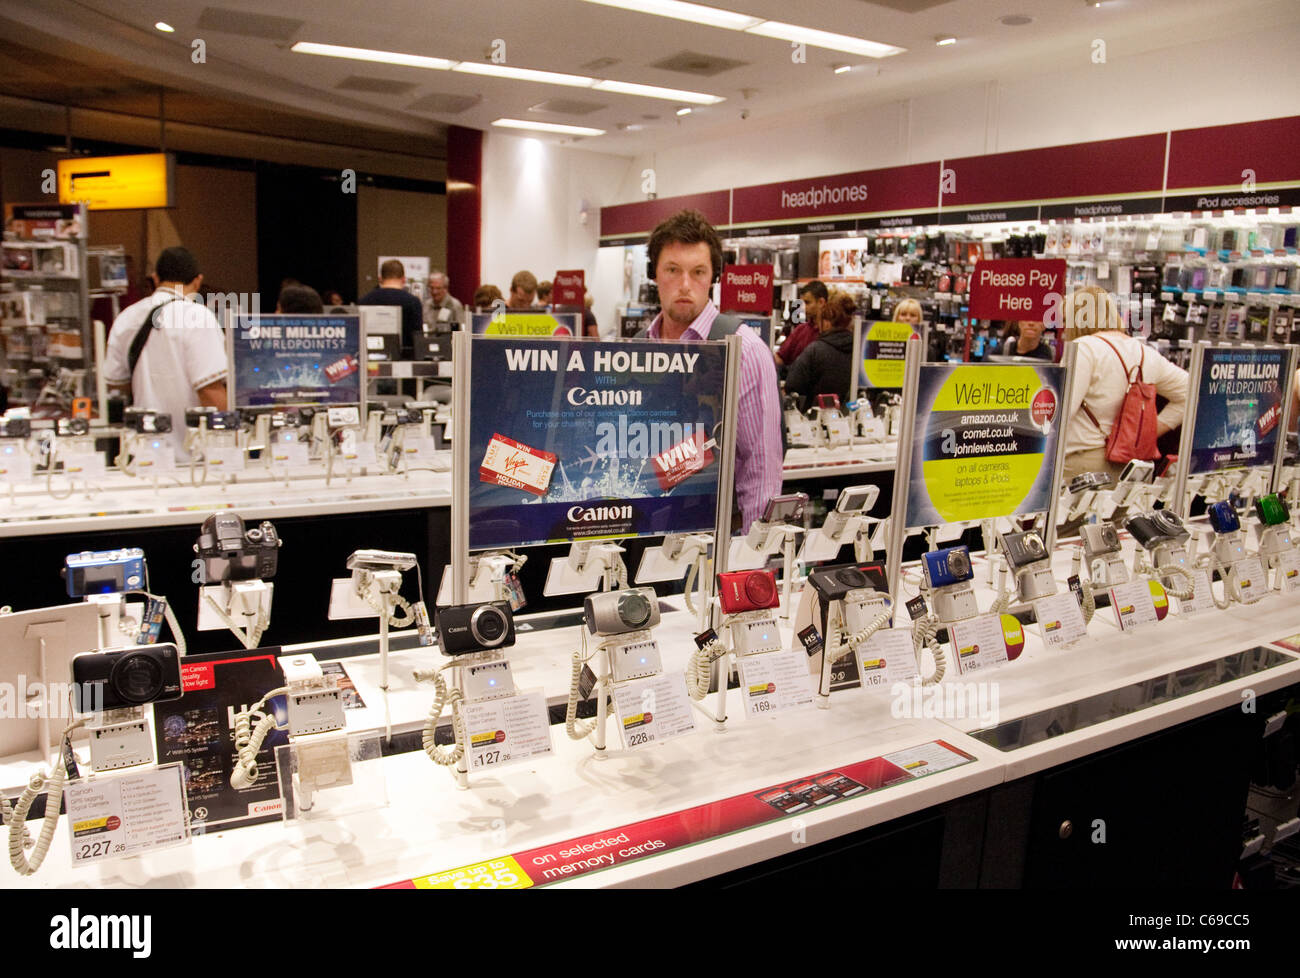 People shopping for digital cameras, Dixons duty free shop, terminal 3, Heathrow airport London UK Stock Photo